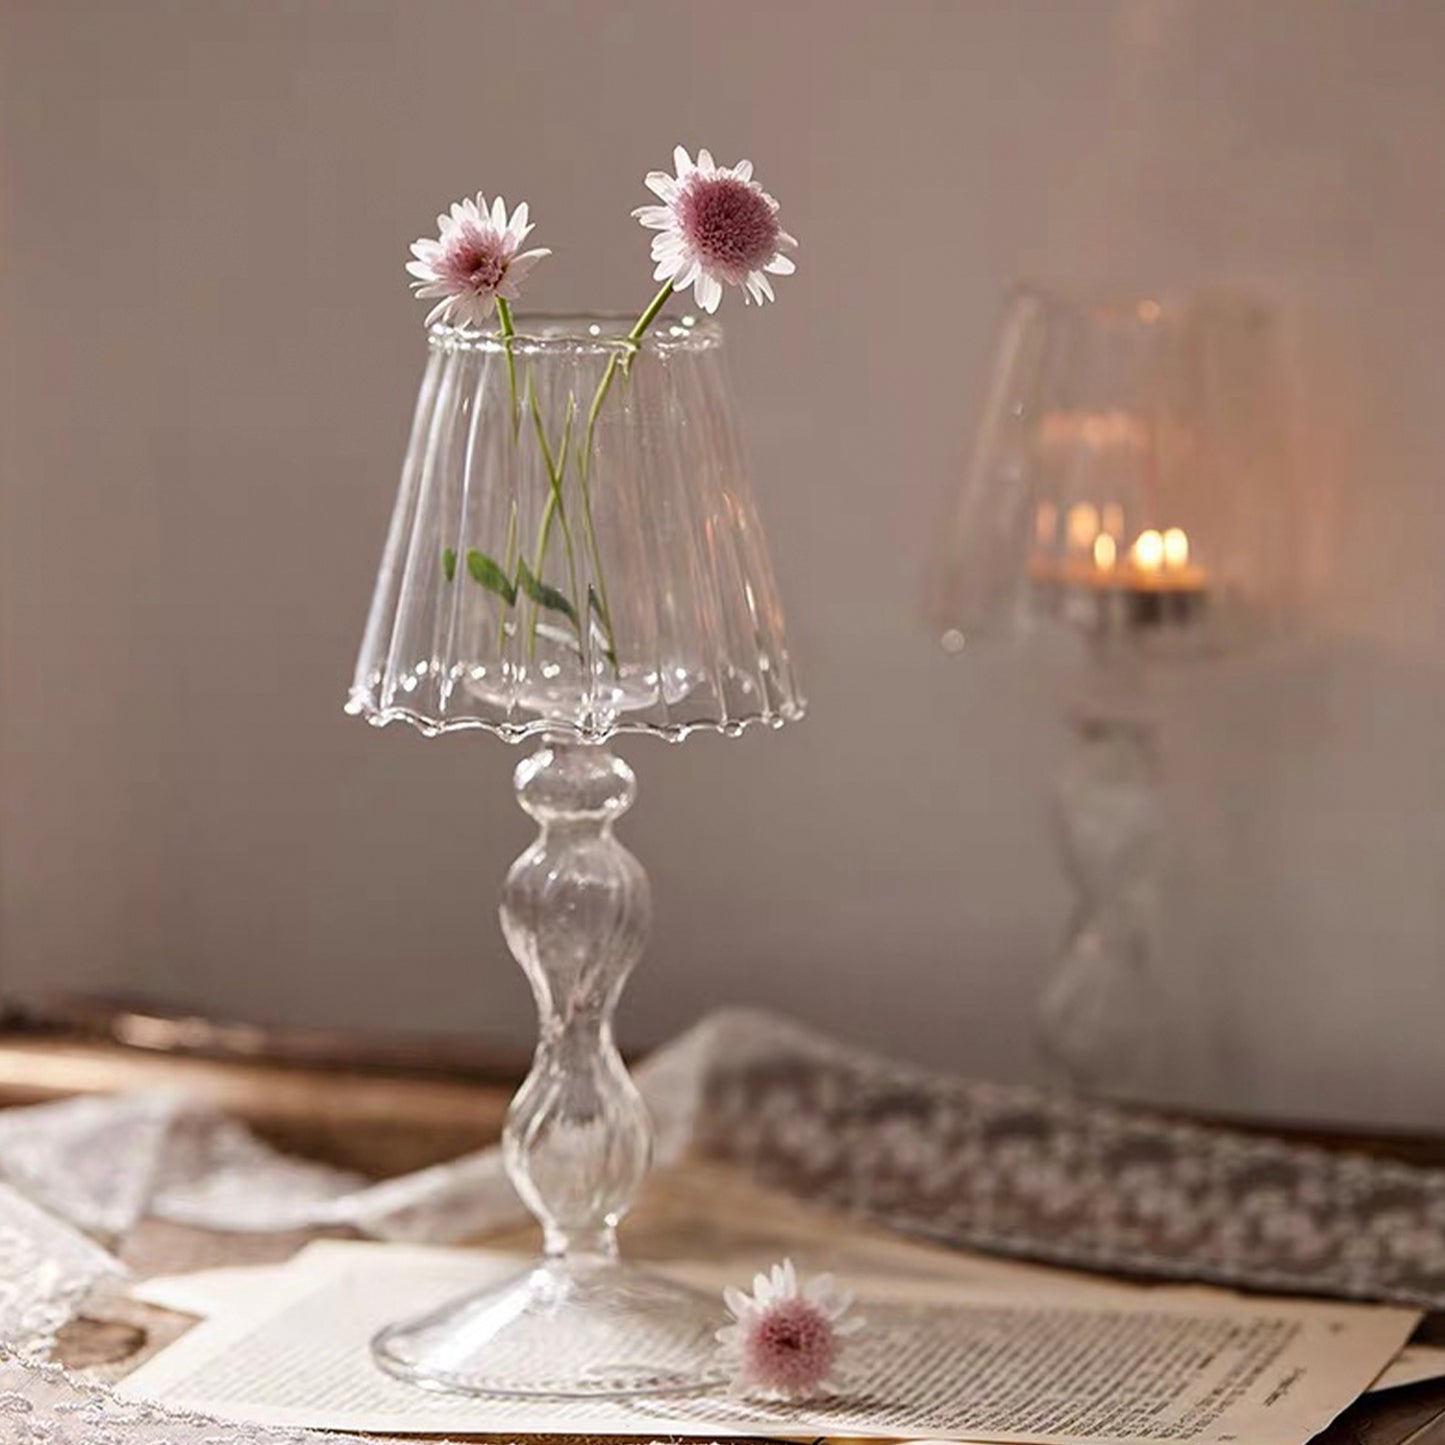 Glass Lamp Candle Holder